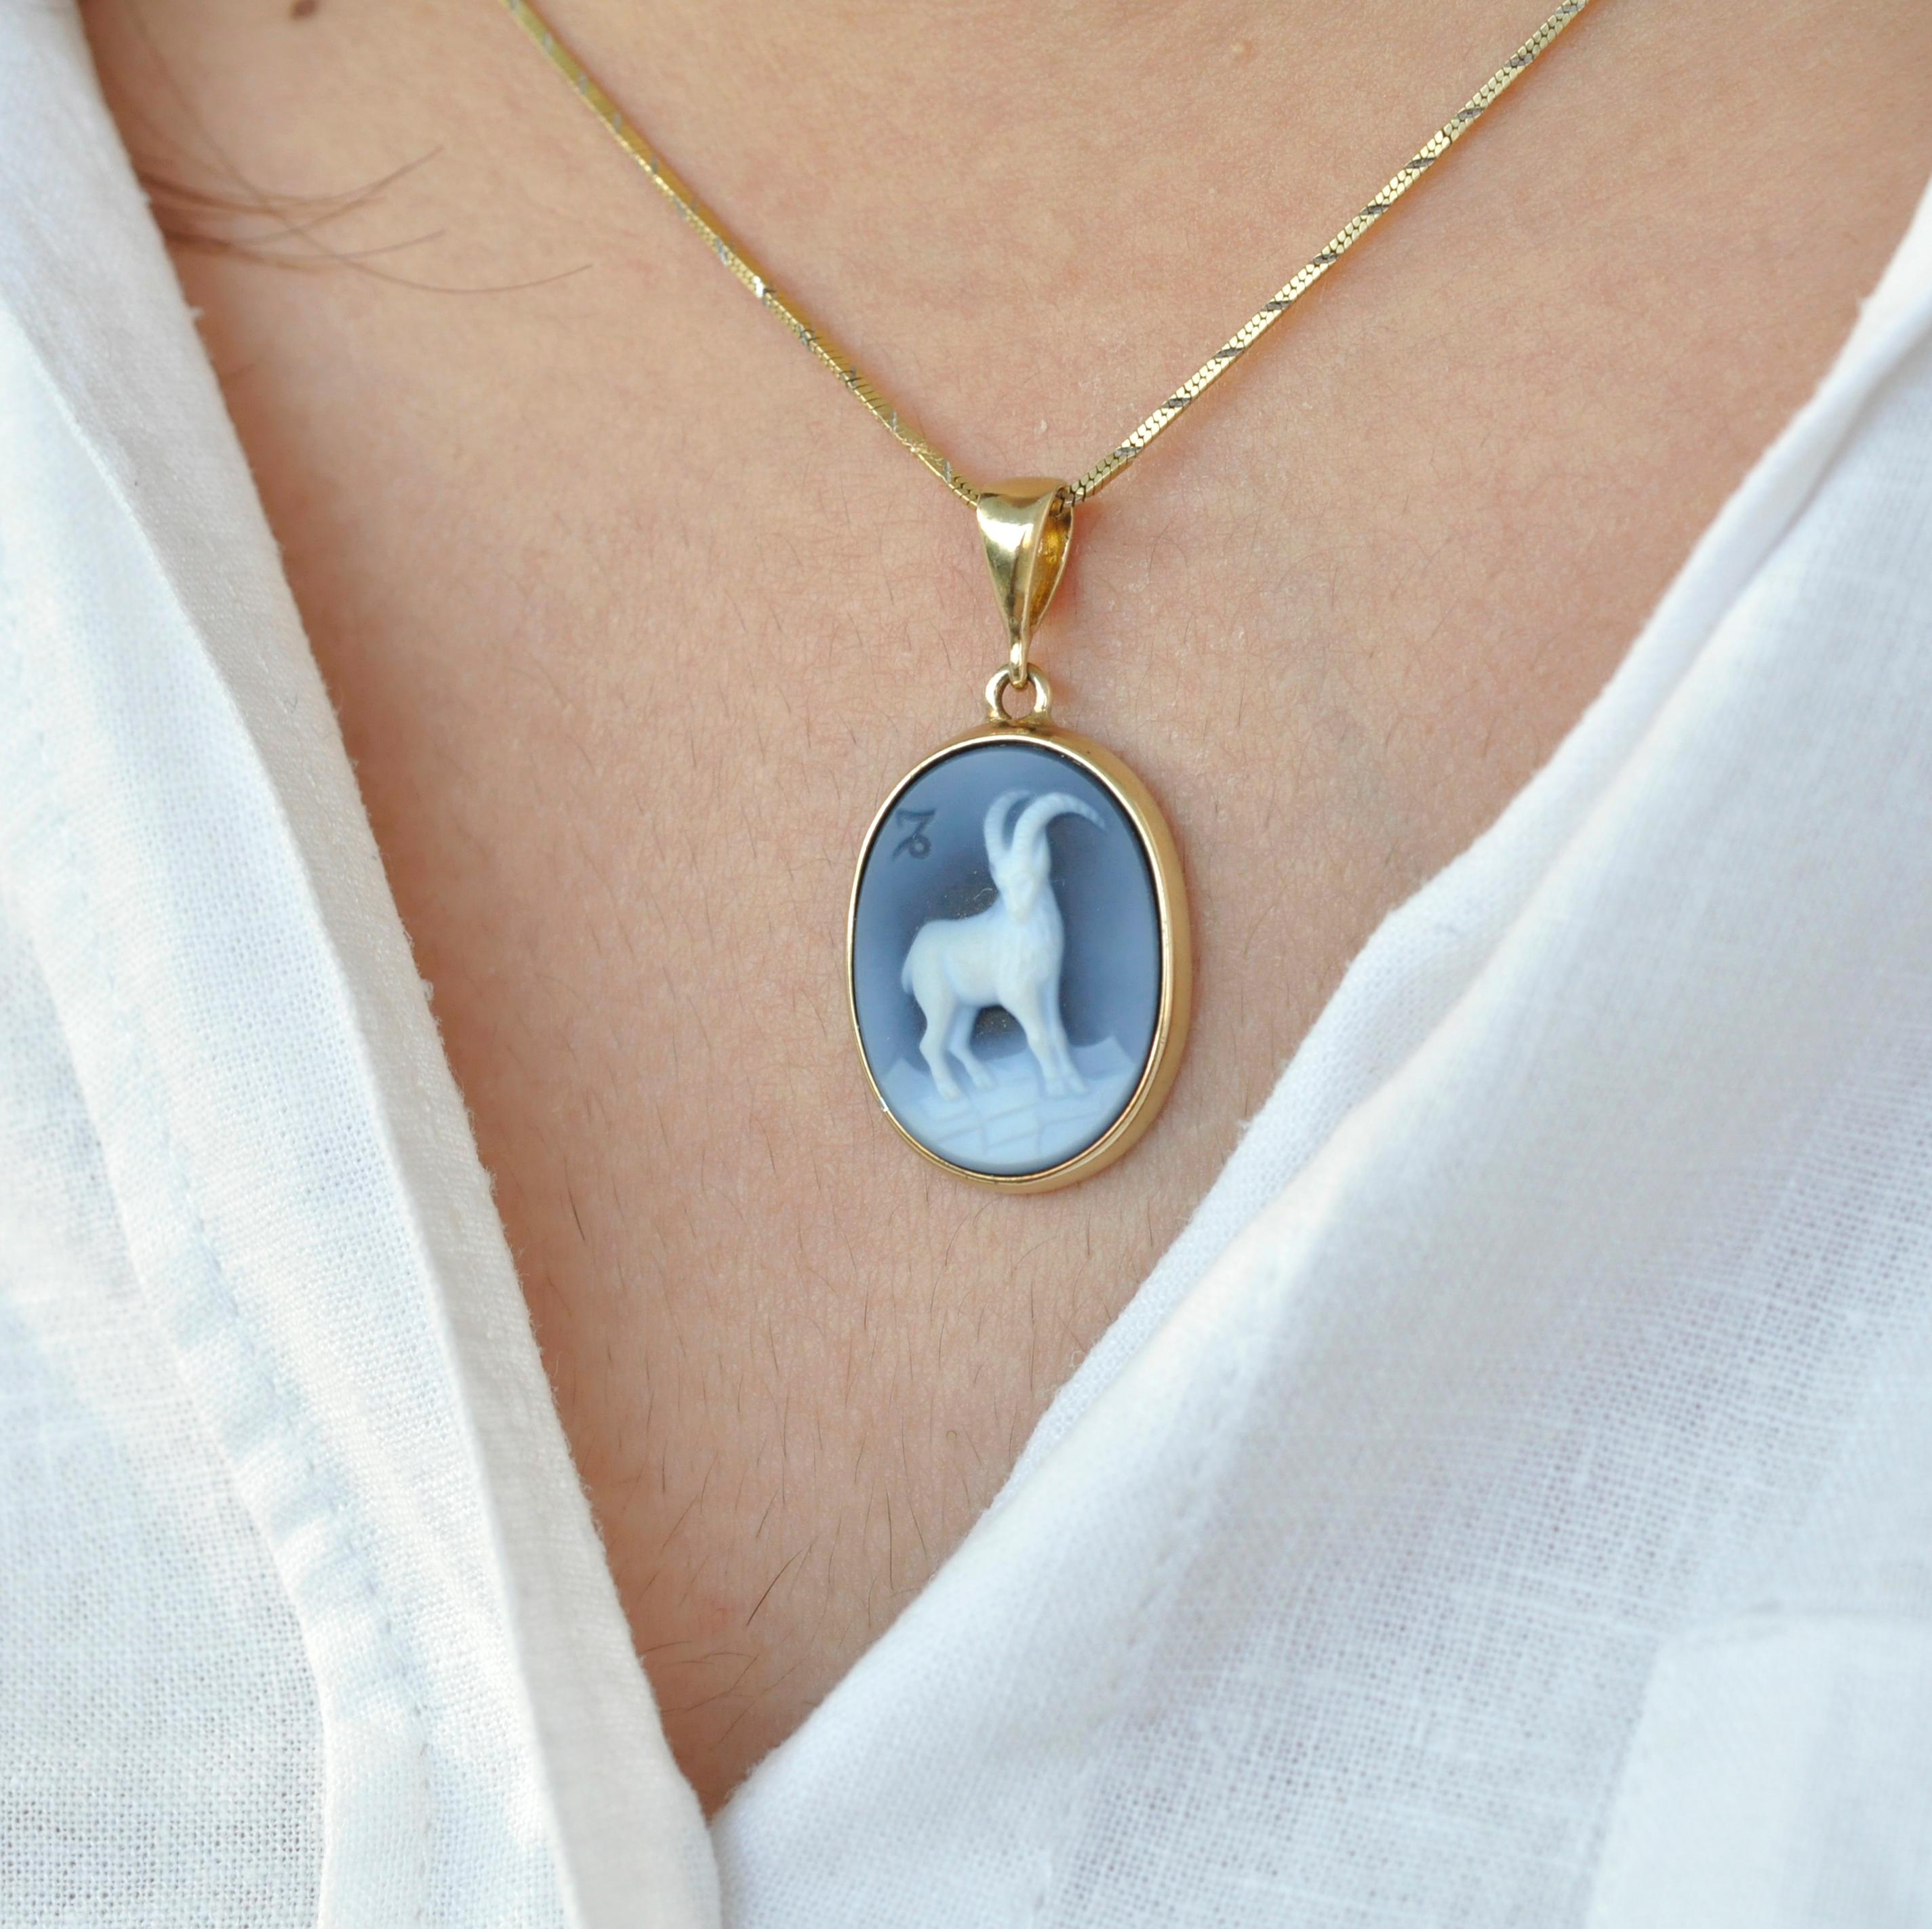 Here's our capricorn zodiac carving cameo pendant necklace from the zodiac collection. The cameo is made in Germany by an expert cameo engraver on the relief of 100% natural agate rock from Brazil (a variety of chalcedony). The pendant is set in our